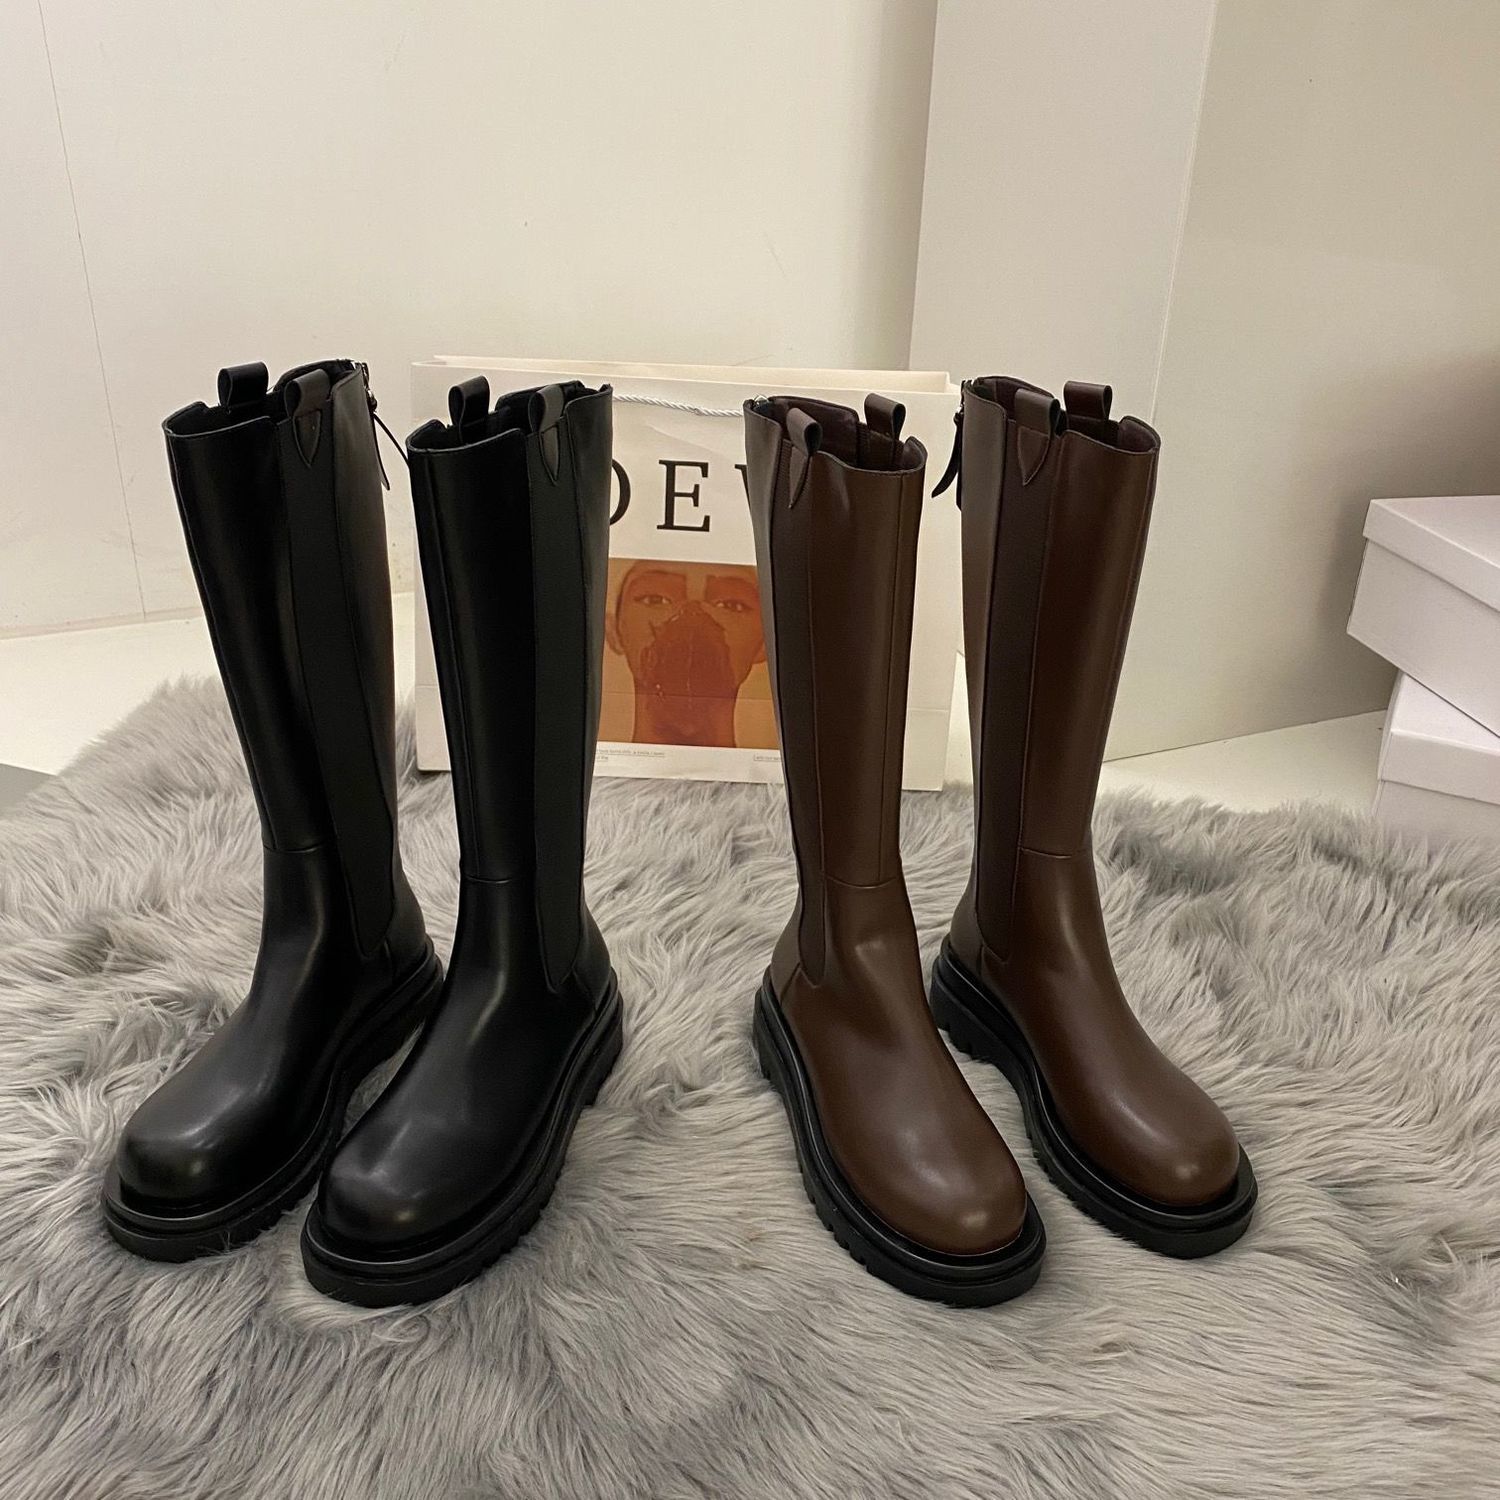 Long boots women's boots 2020 new autumn and winter Plush women's shoes